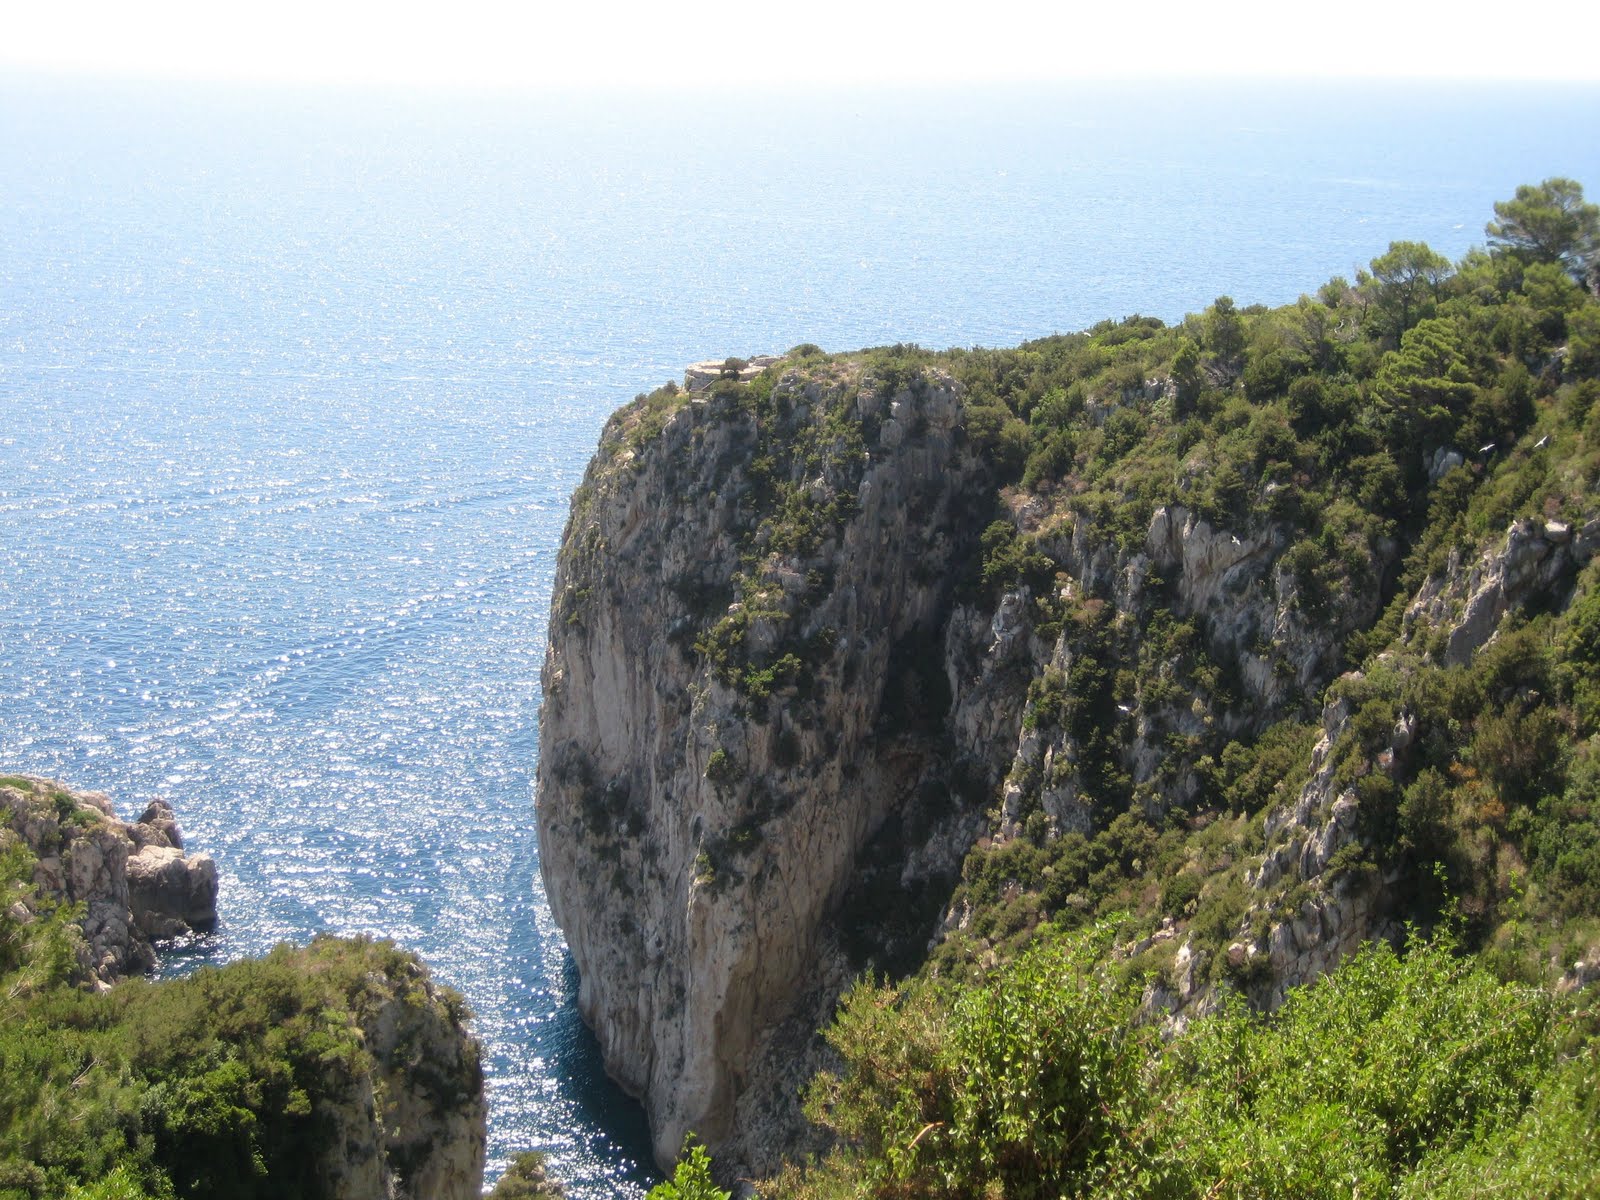 Summer in Europe: Capri: one of the most beautiful places on earth